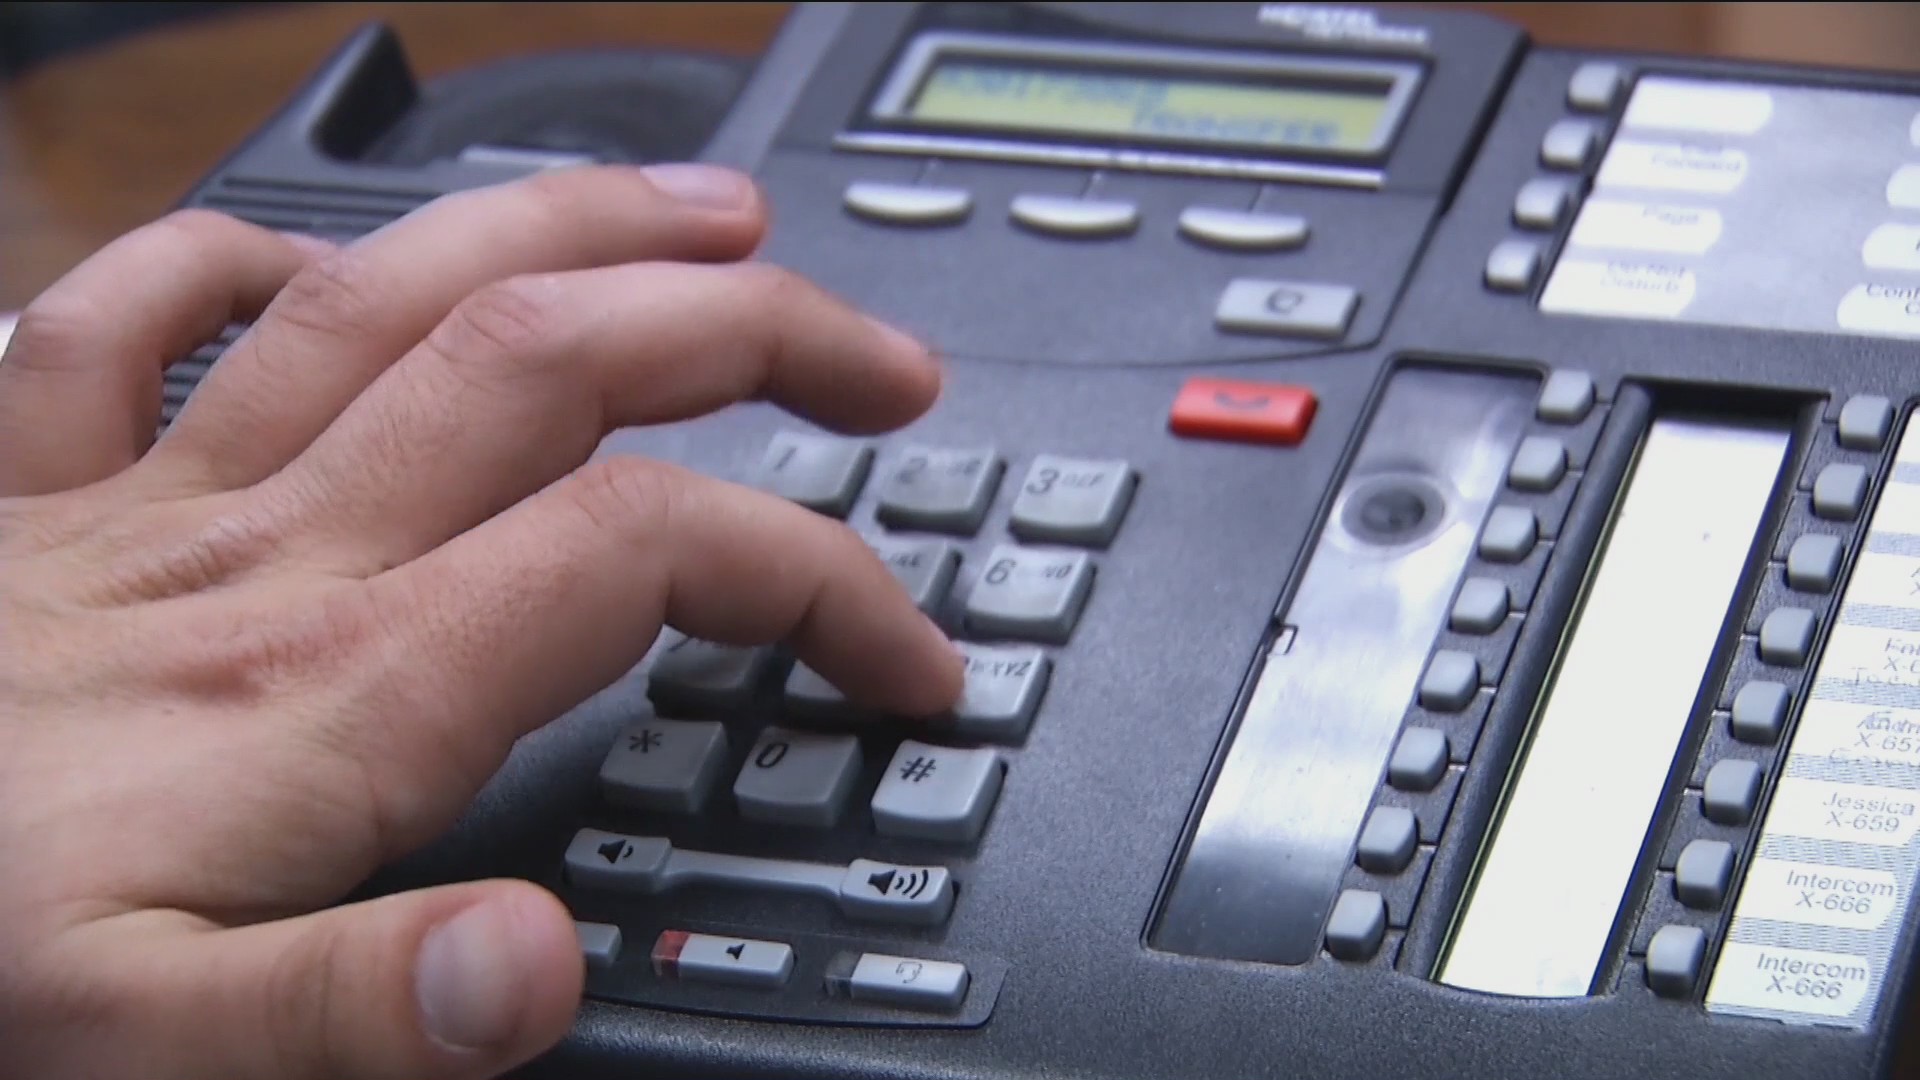 BBB helps you track if someone wants to cheat you |  Univision Washington WFDC